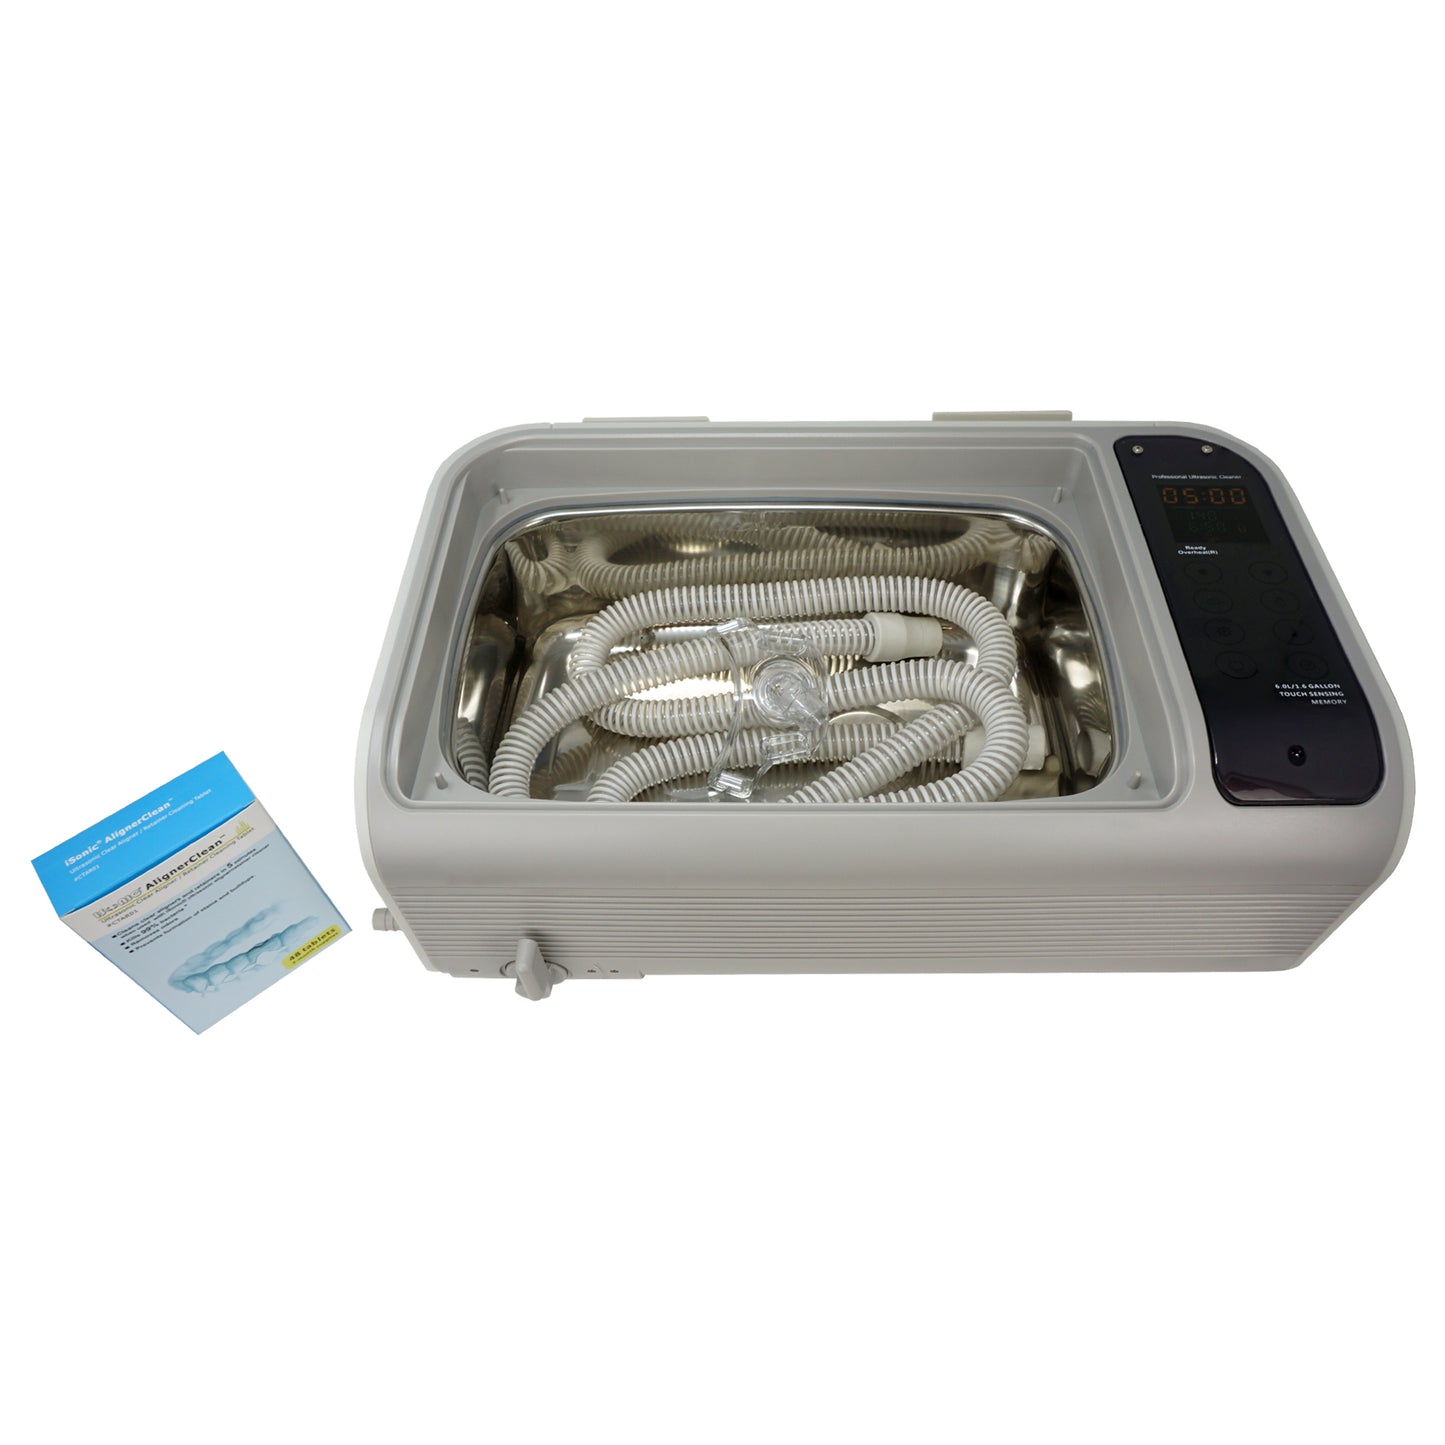 P4862-CPAP (large, lightly used) | iSonic® Ultrasonic CPAP/BiPAP Cleaner, 1.6Gal/6L, with a stainless steel weight bracket, a box of cleaning tablet, heater, drain. Free Shipping!